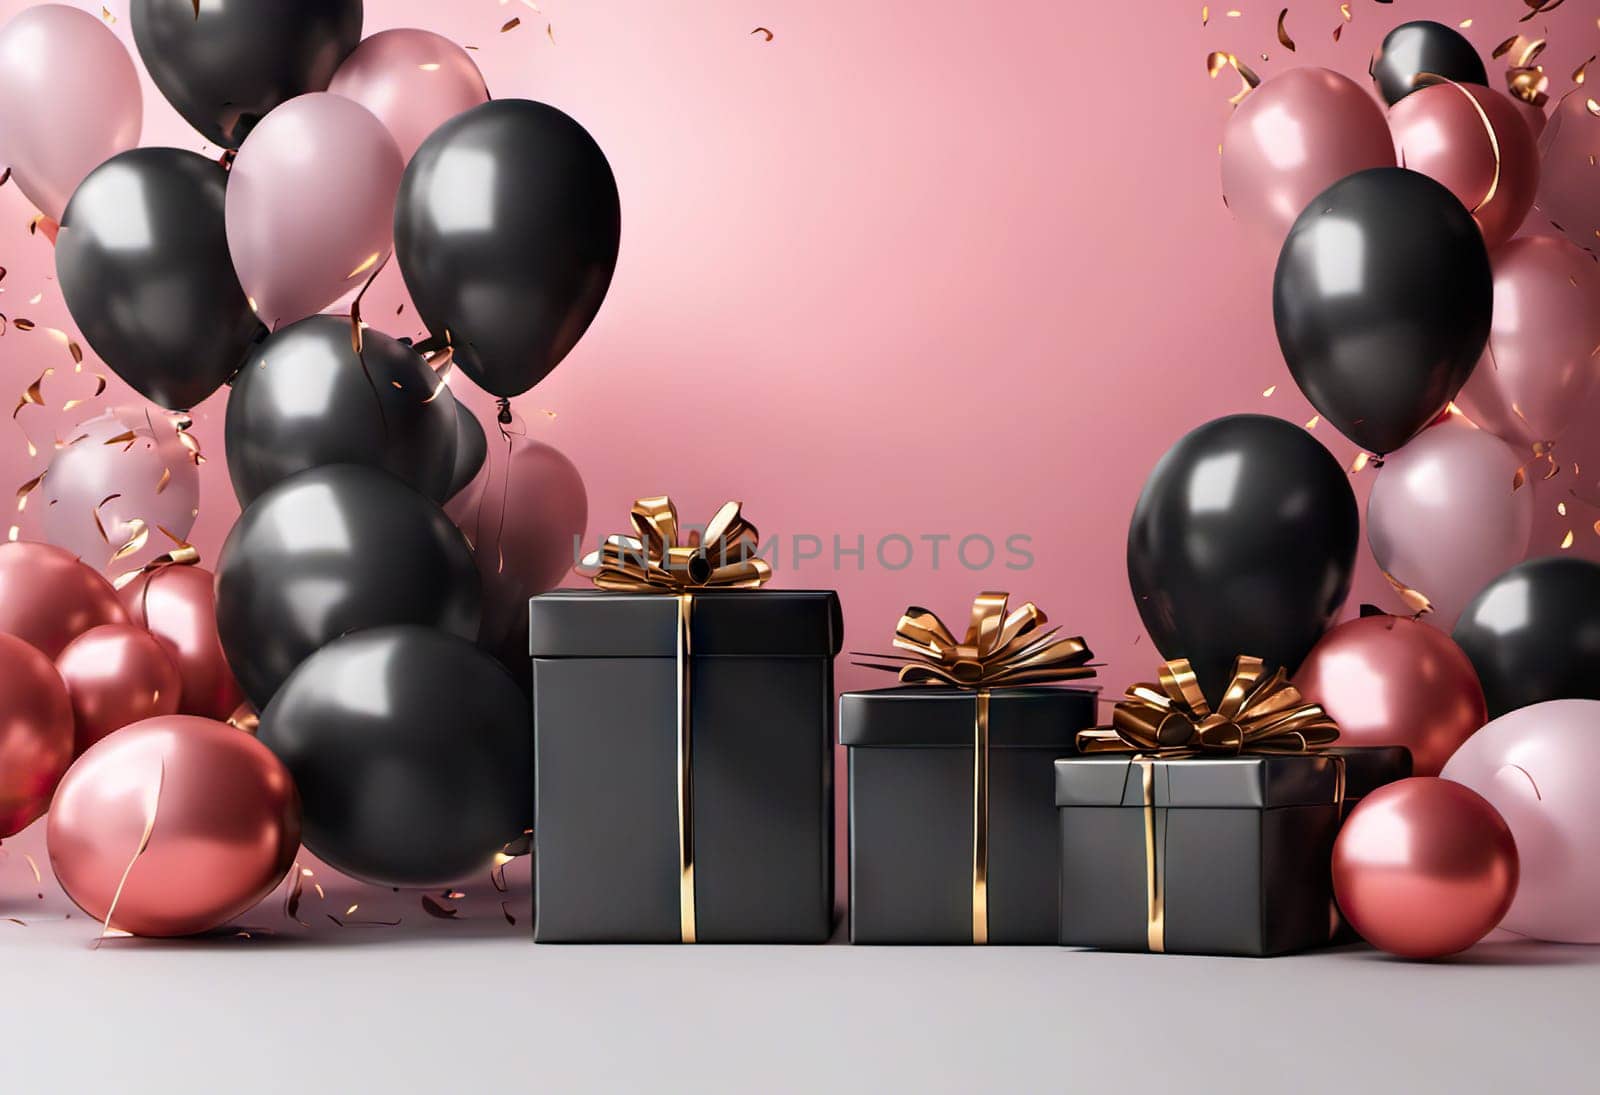 Gift box with colorful balloons and confetti on background, copy space, holiday concept for birthday or black friday discounts